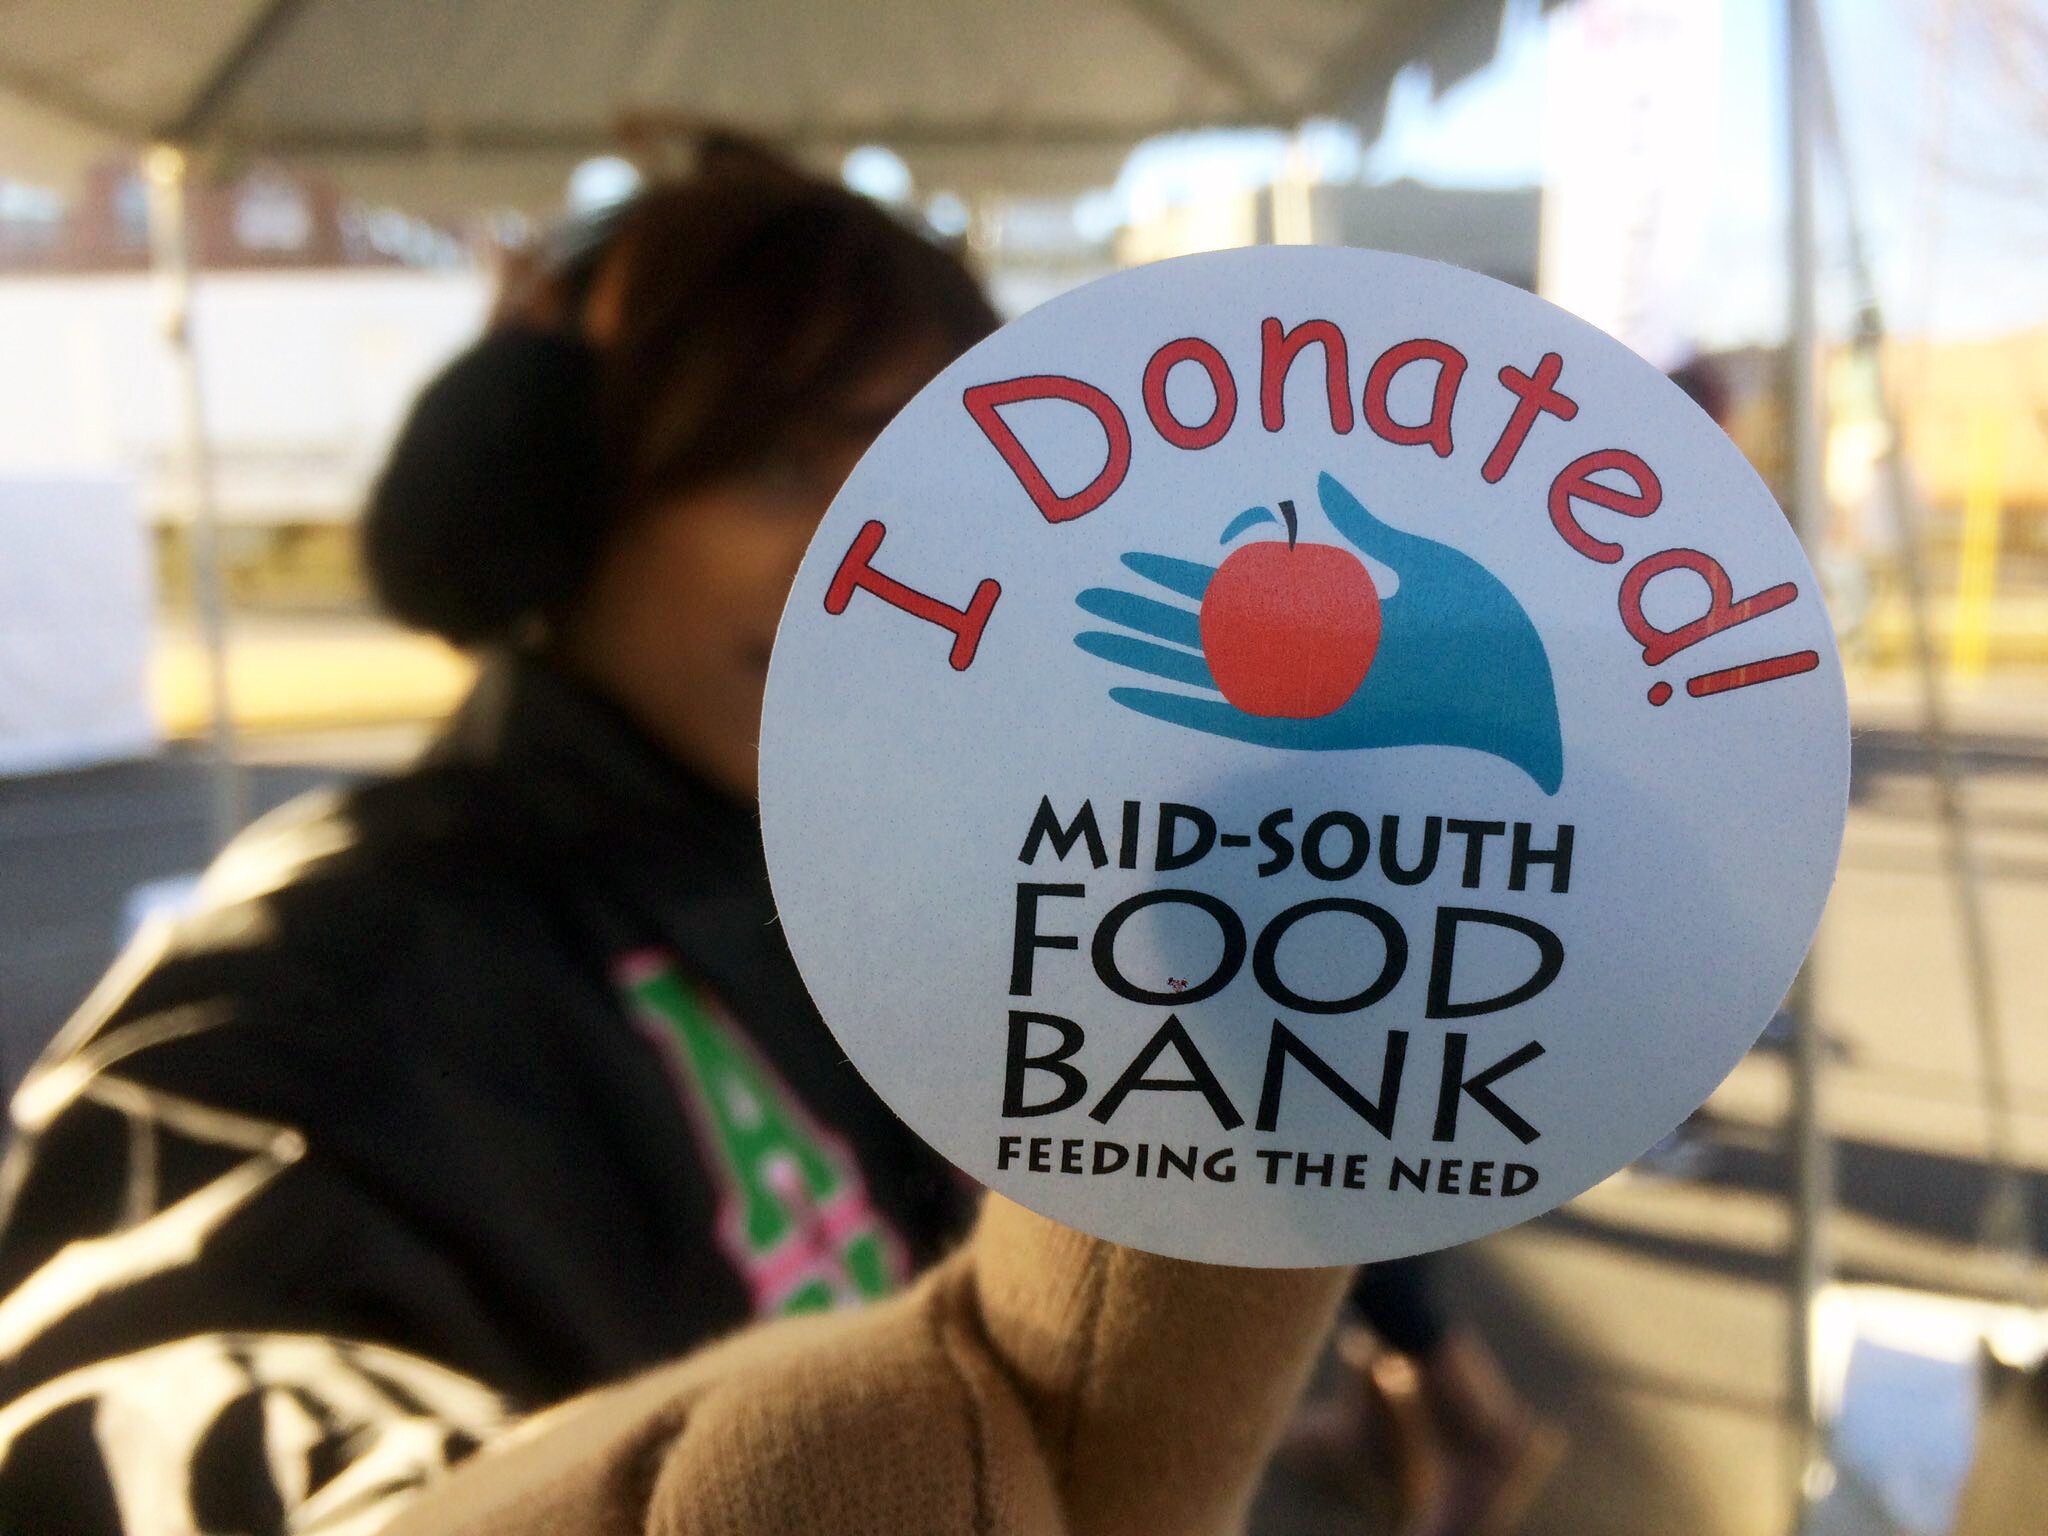 Interview with Robert Onstad of Mid-South Food Bank